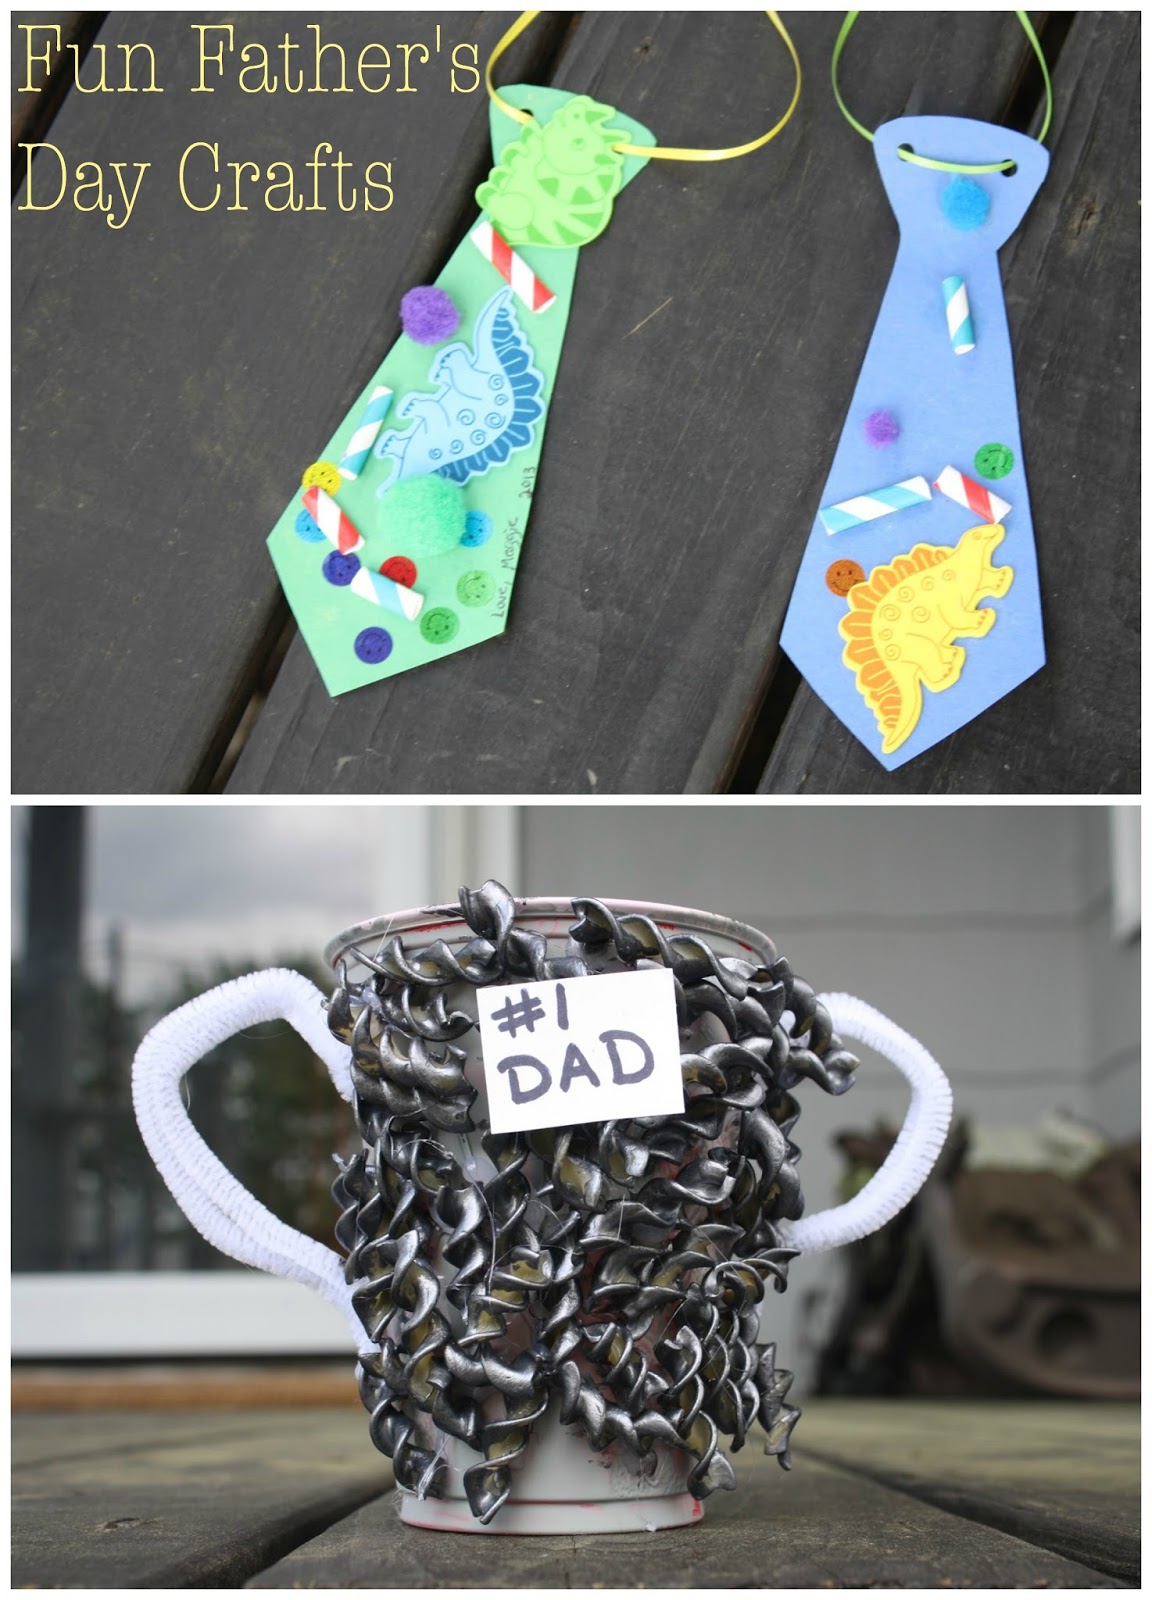 A Father's Day Gift He'll Never Forget!